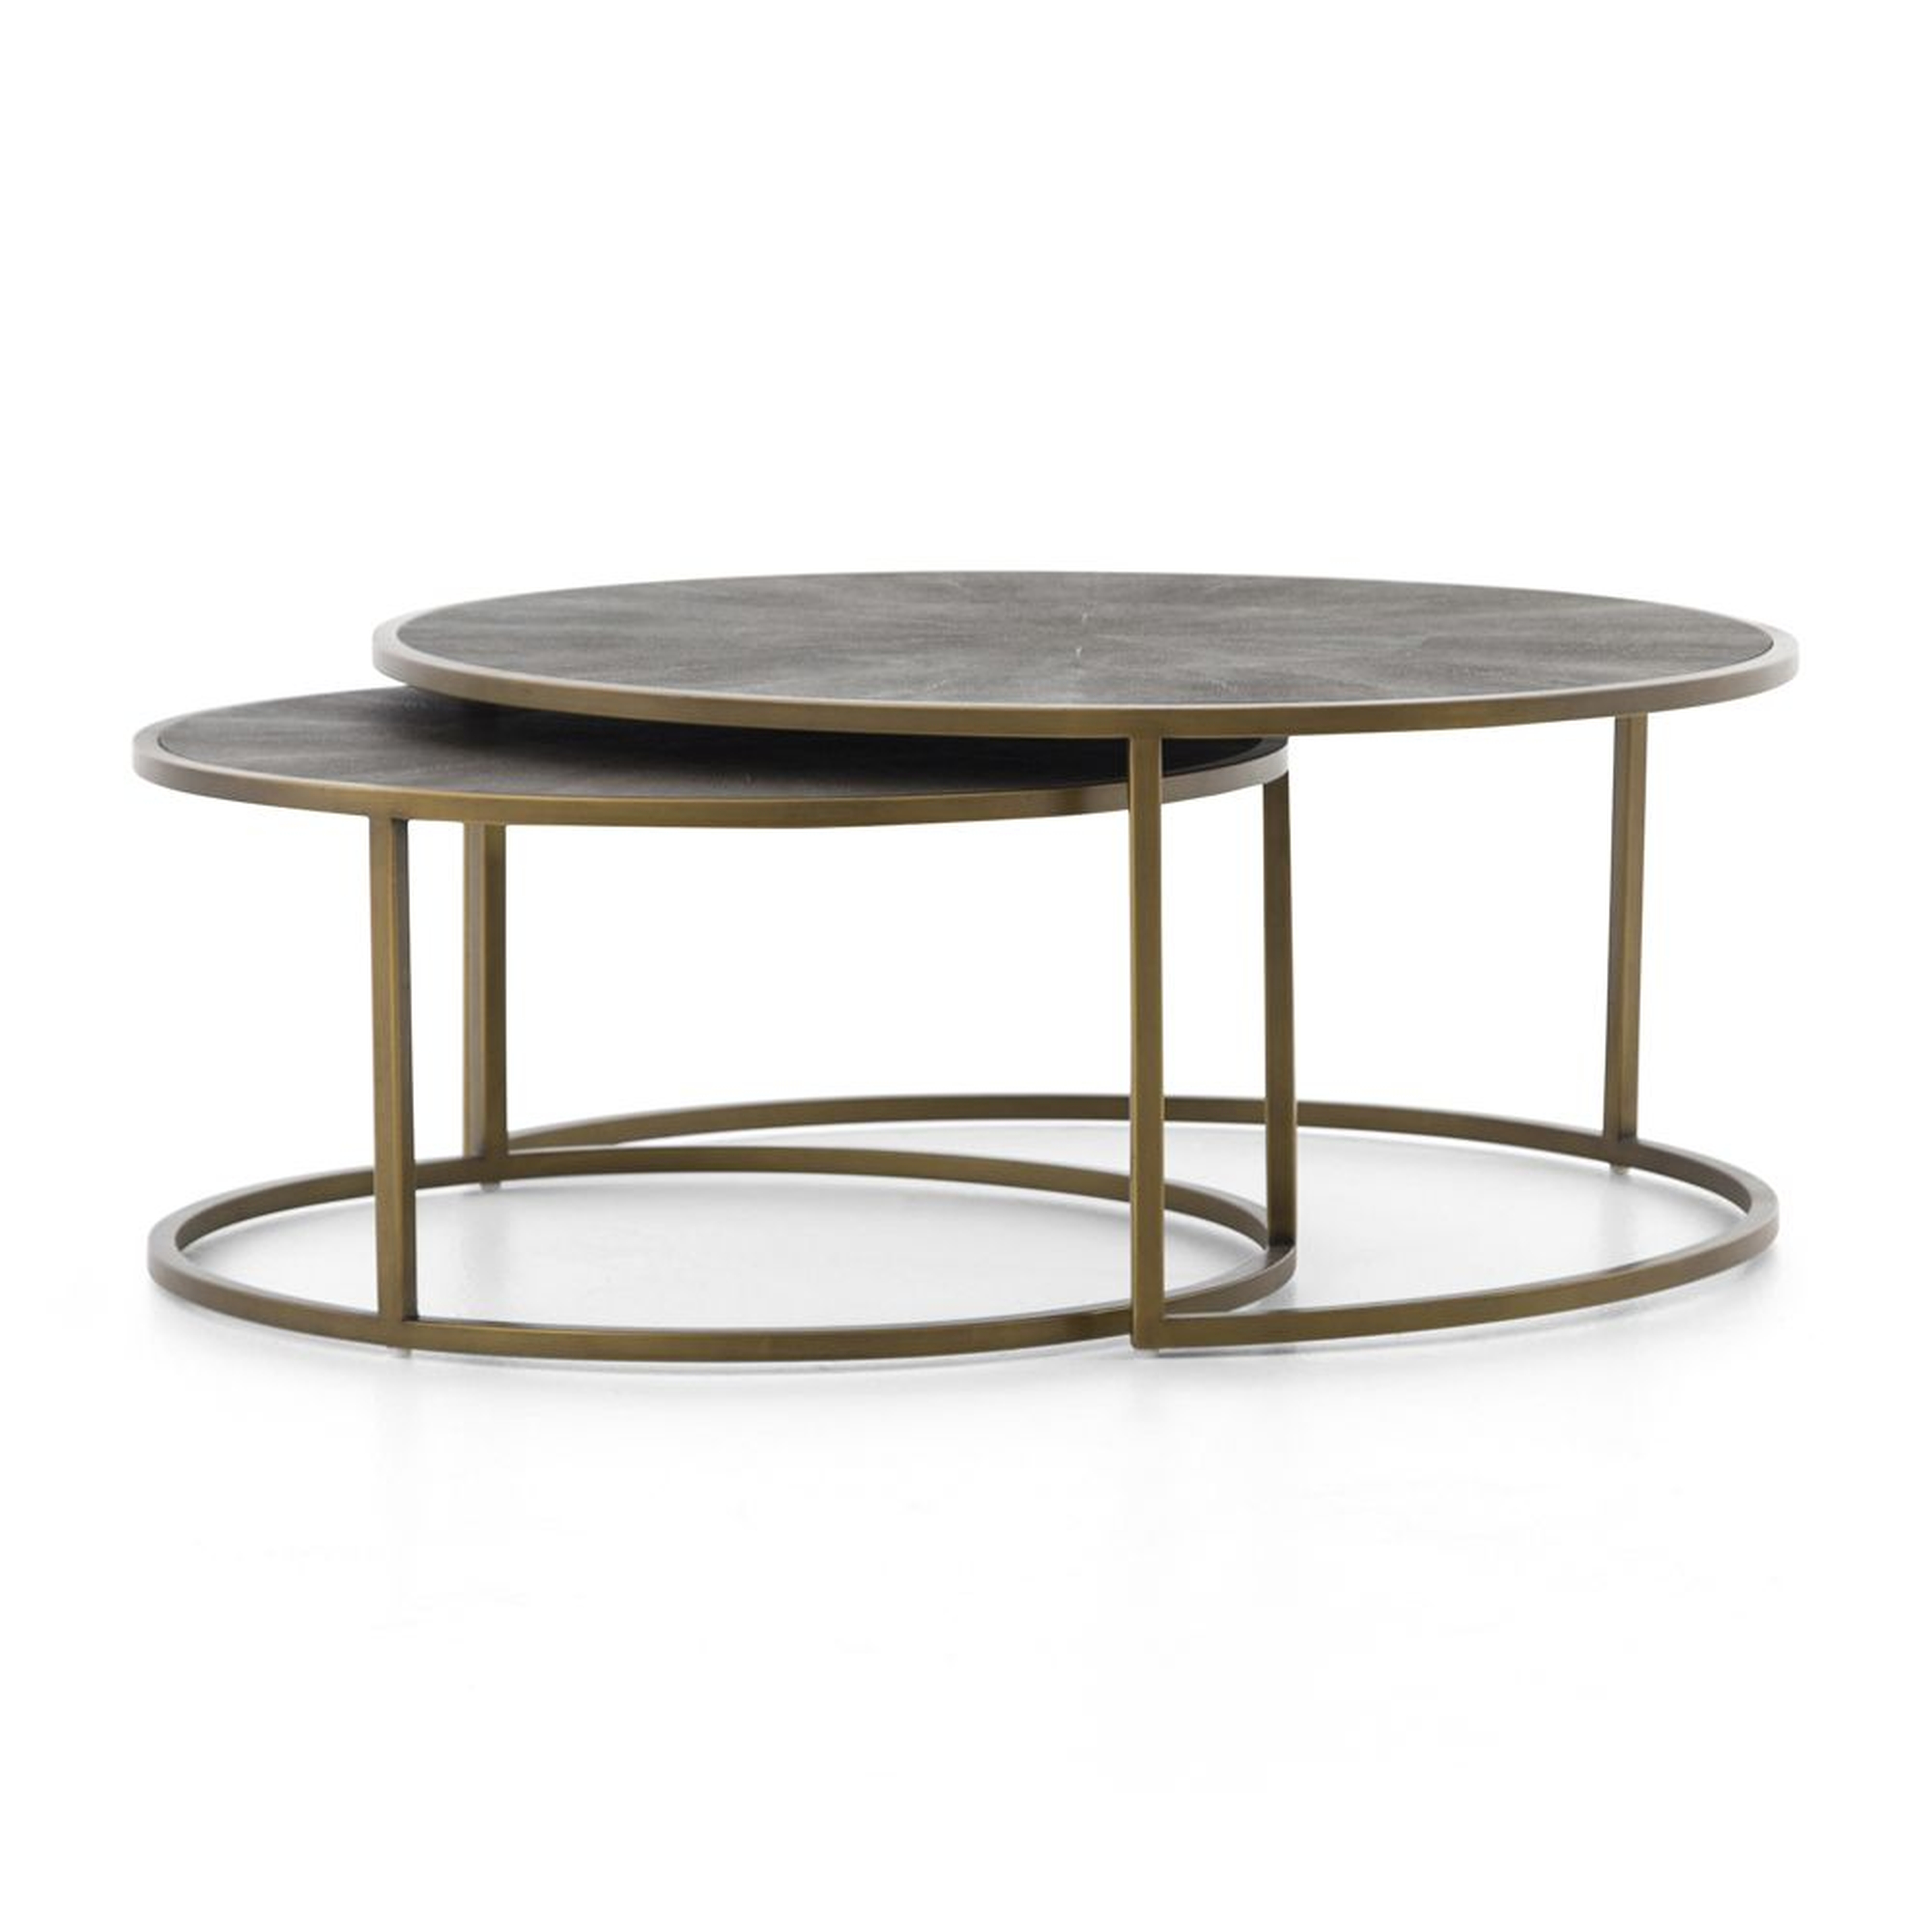 Shagreen Antique Brass Nesting Coffee Tables - Crate and Barrel